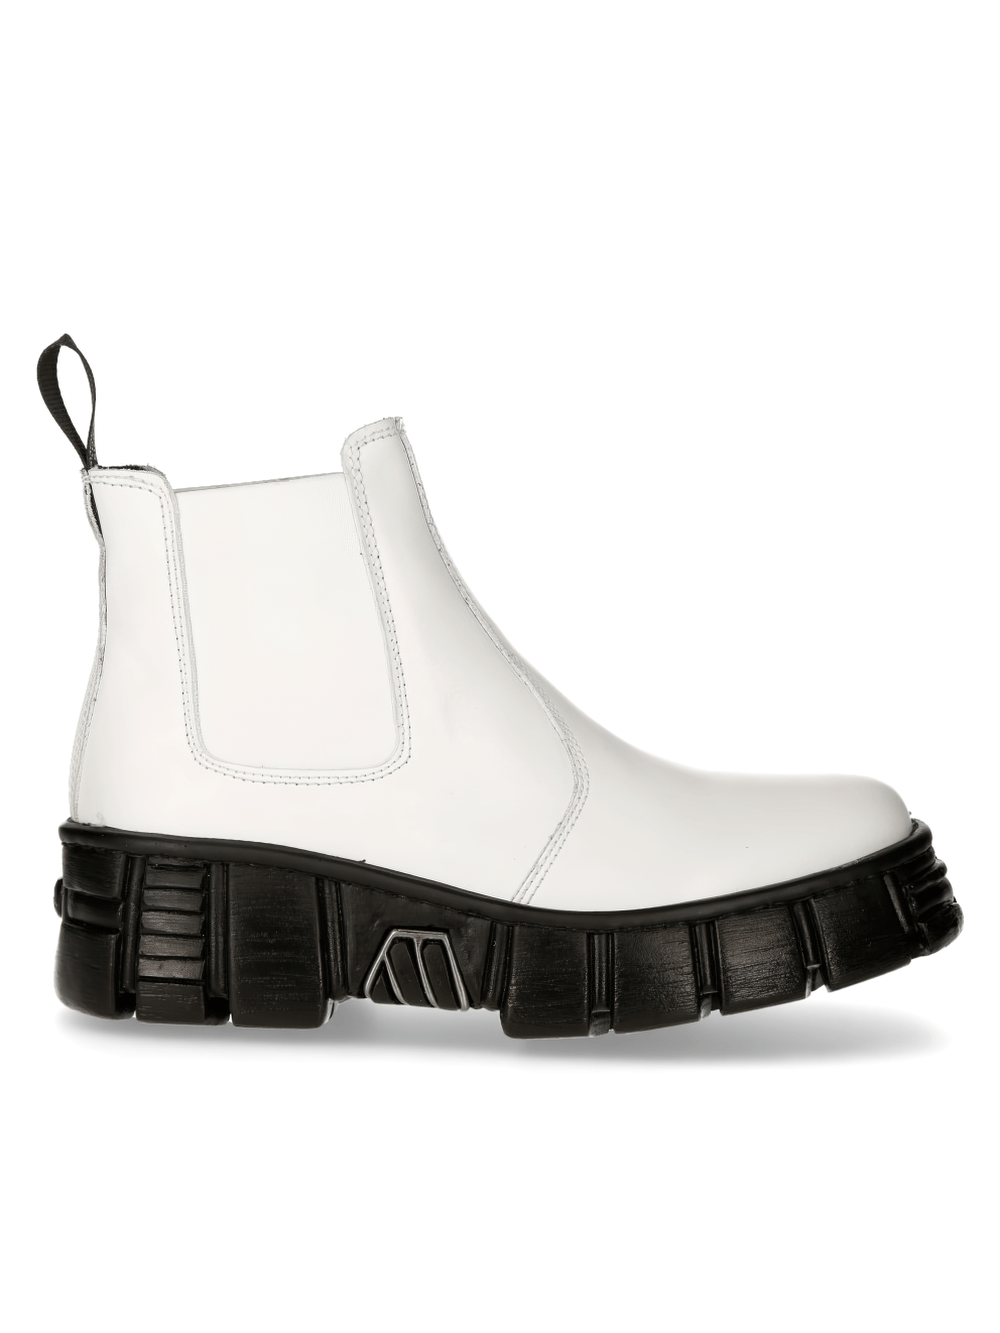 NEW ROCK Chic White Leather Military Ankle Boots